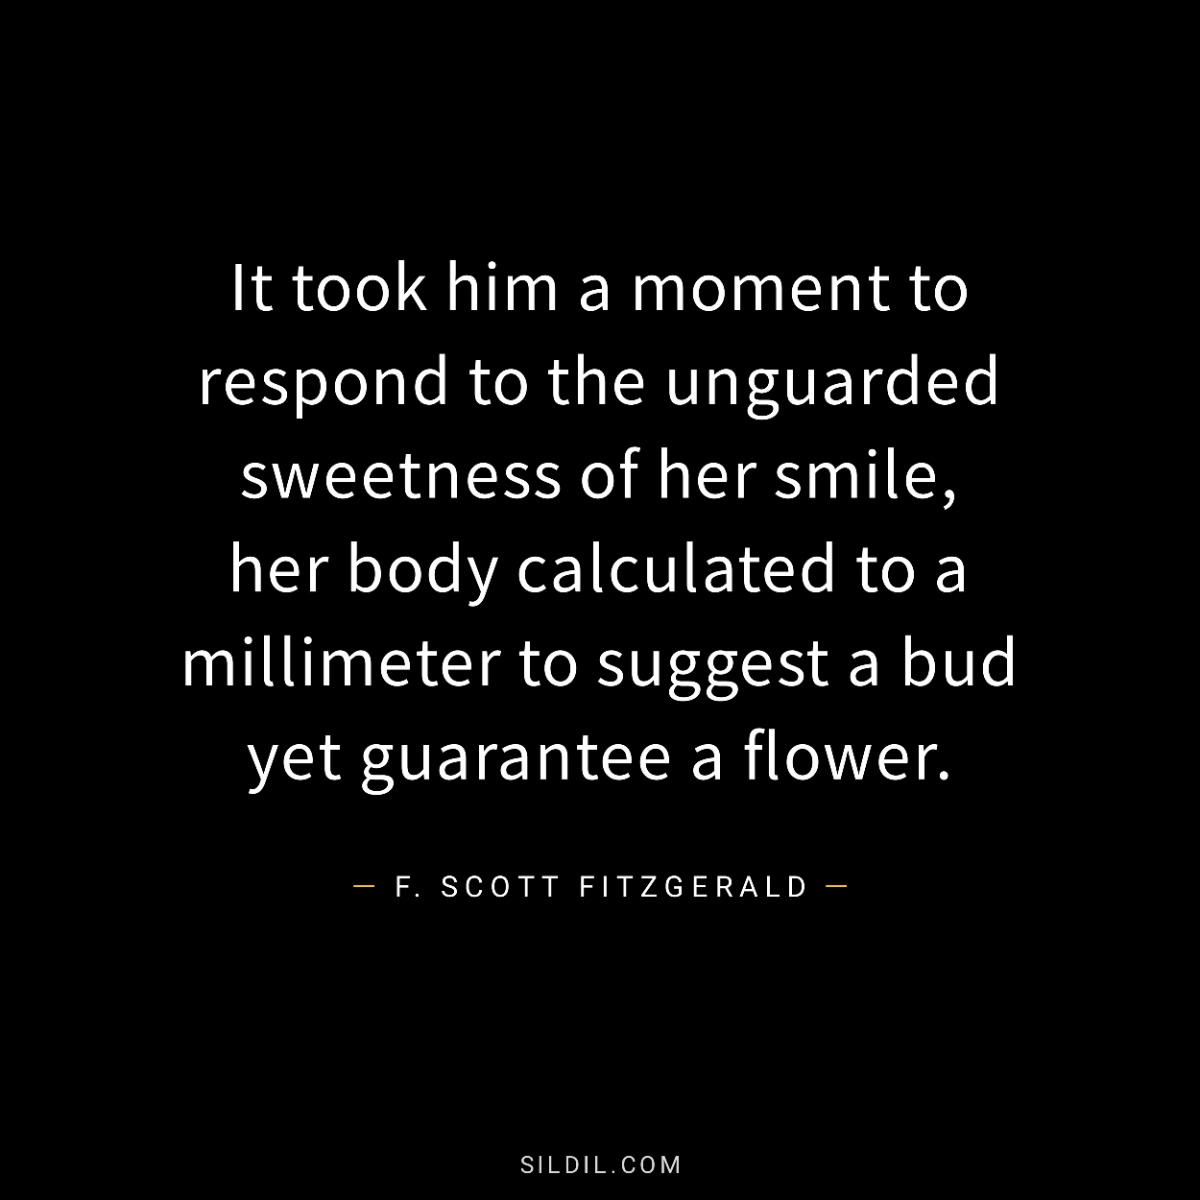 It took him a moment to respond to the unguarded sweetness of her smile, her body calculated to a millimeter to suggest a bud yet guarantee a flower.